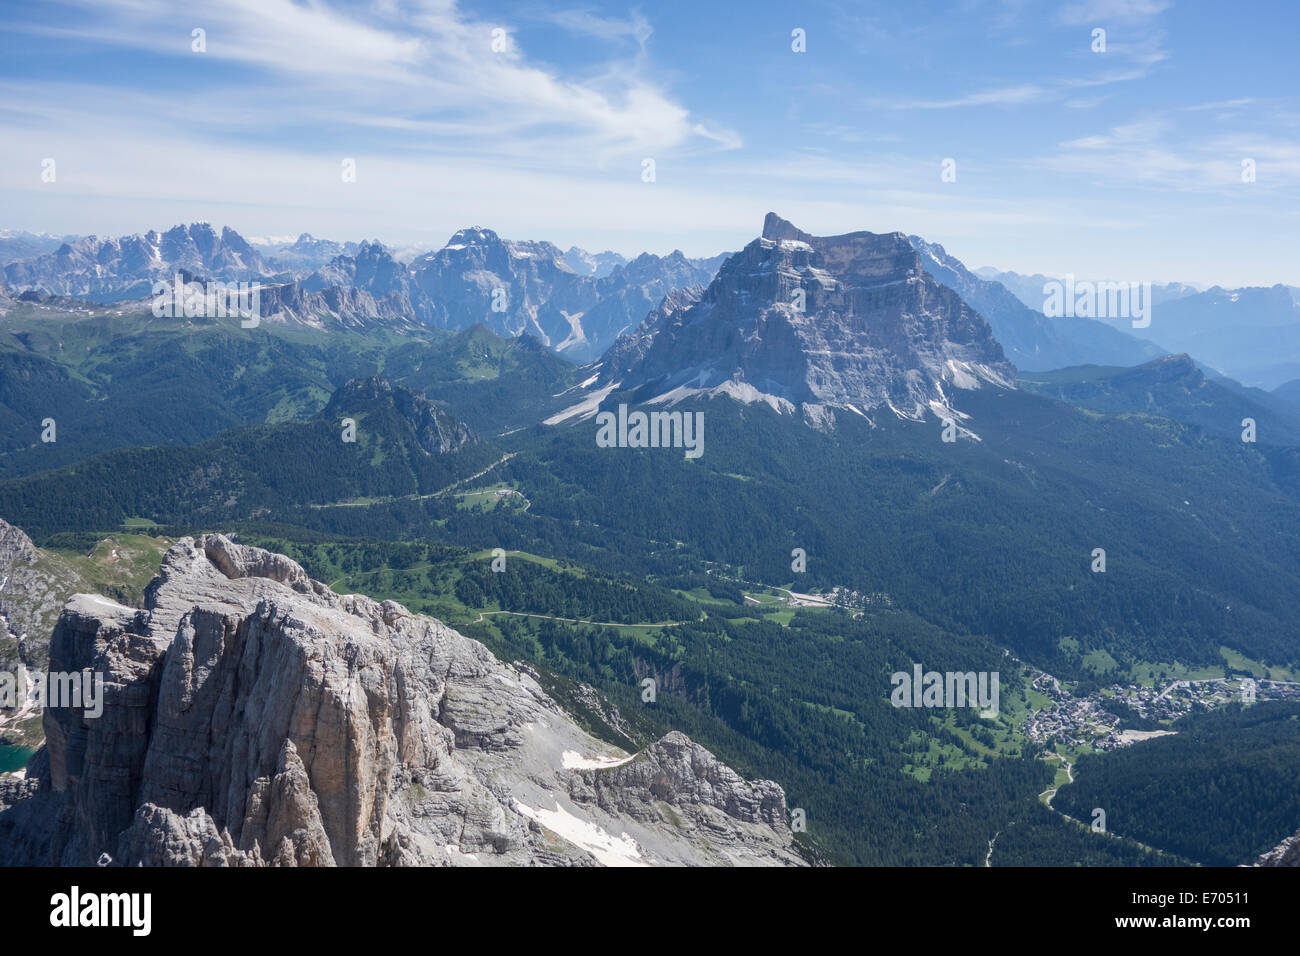 View of mountains and valley, Alleghe, Dolomites, Italy Stock Photo